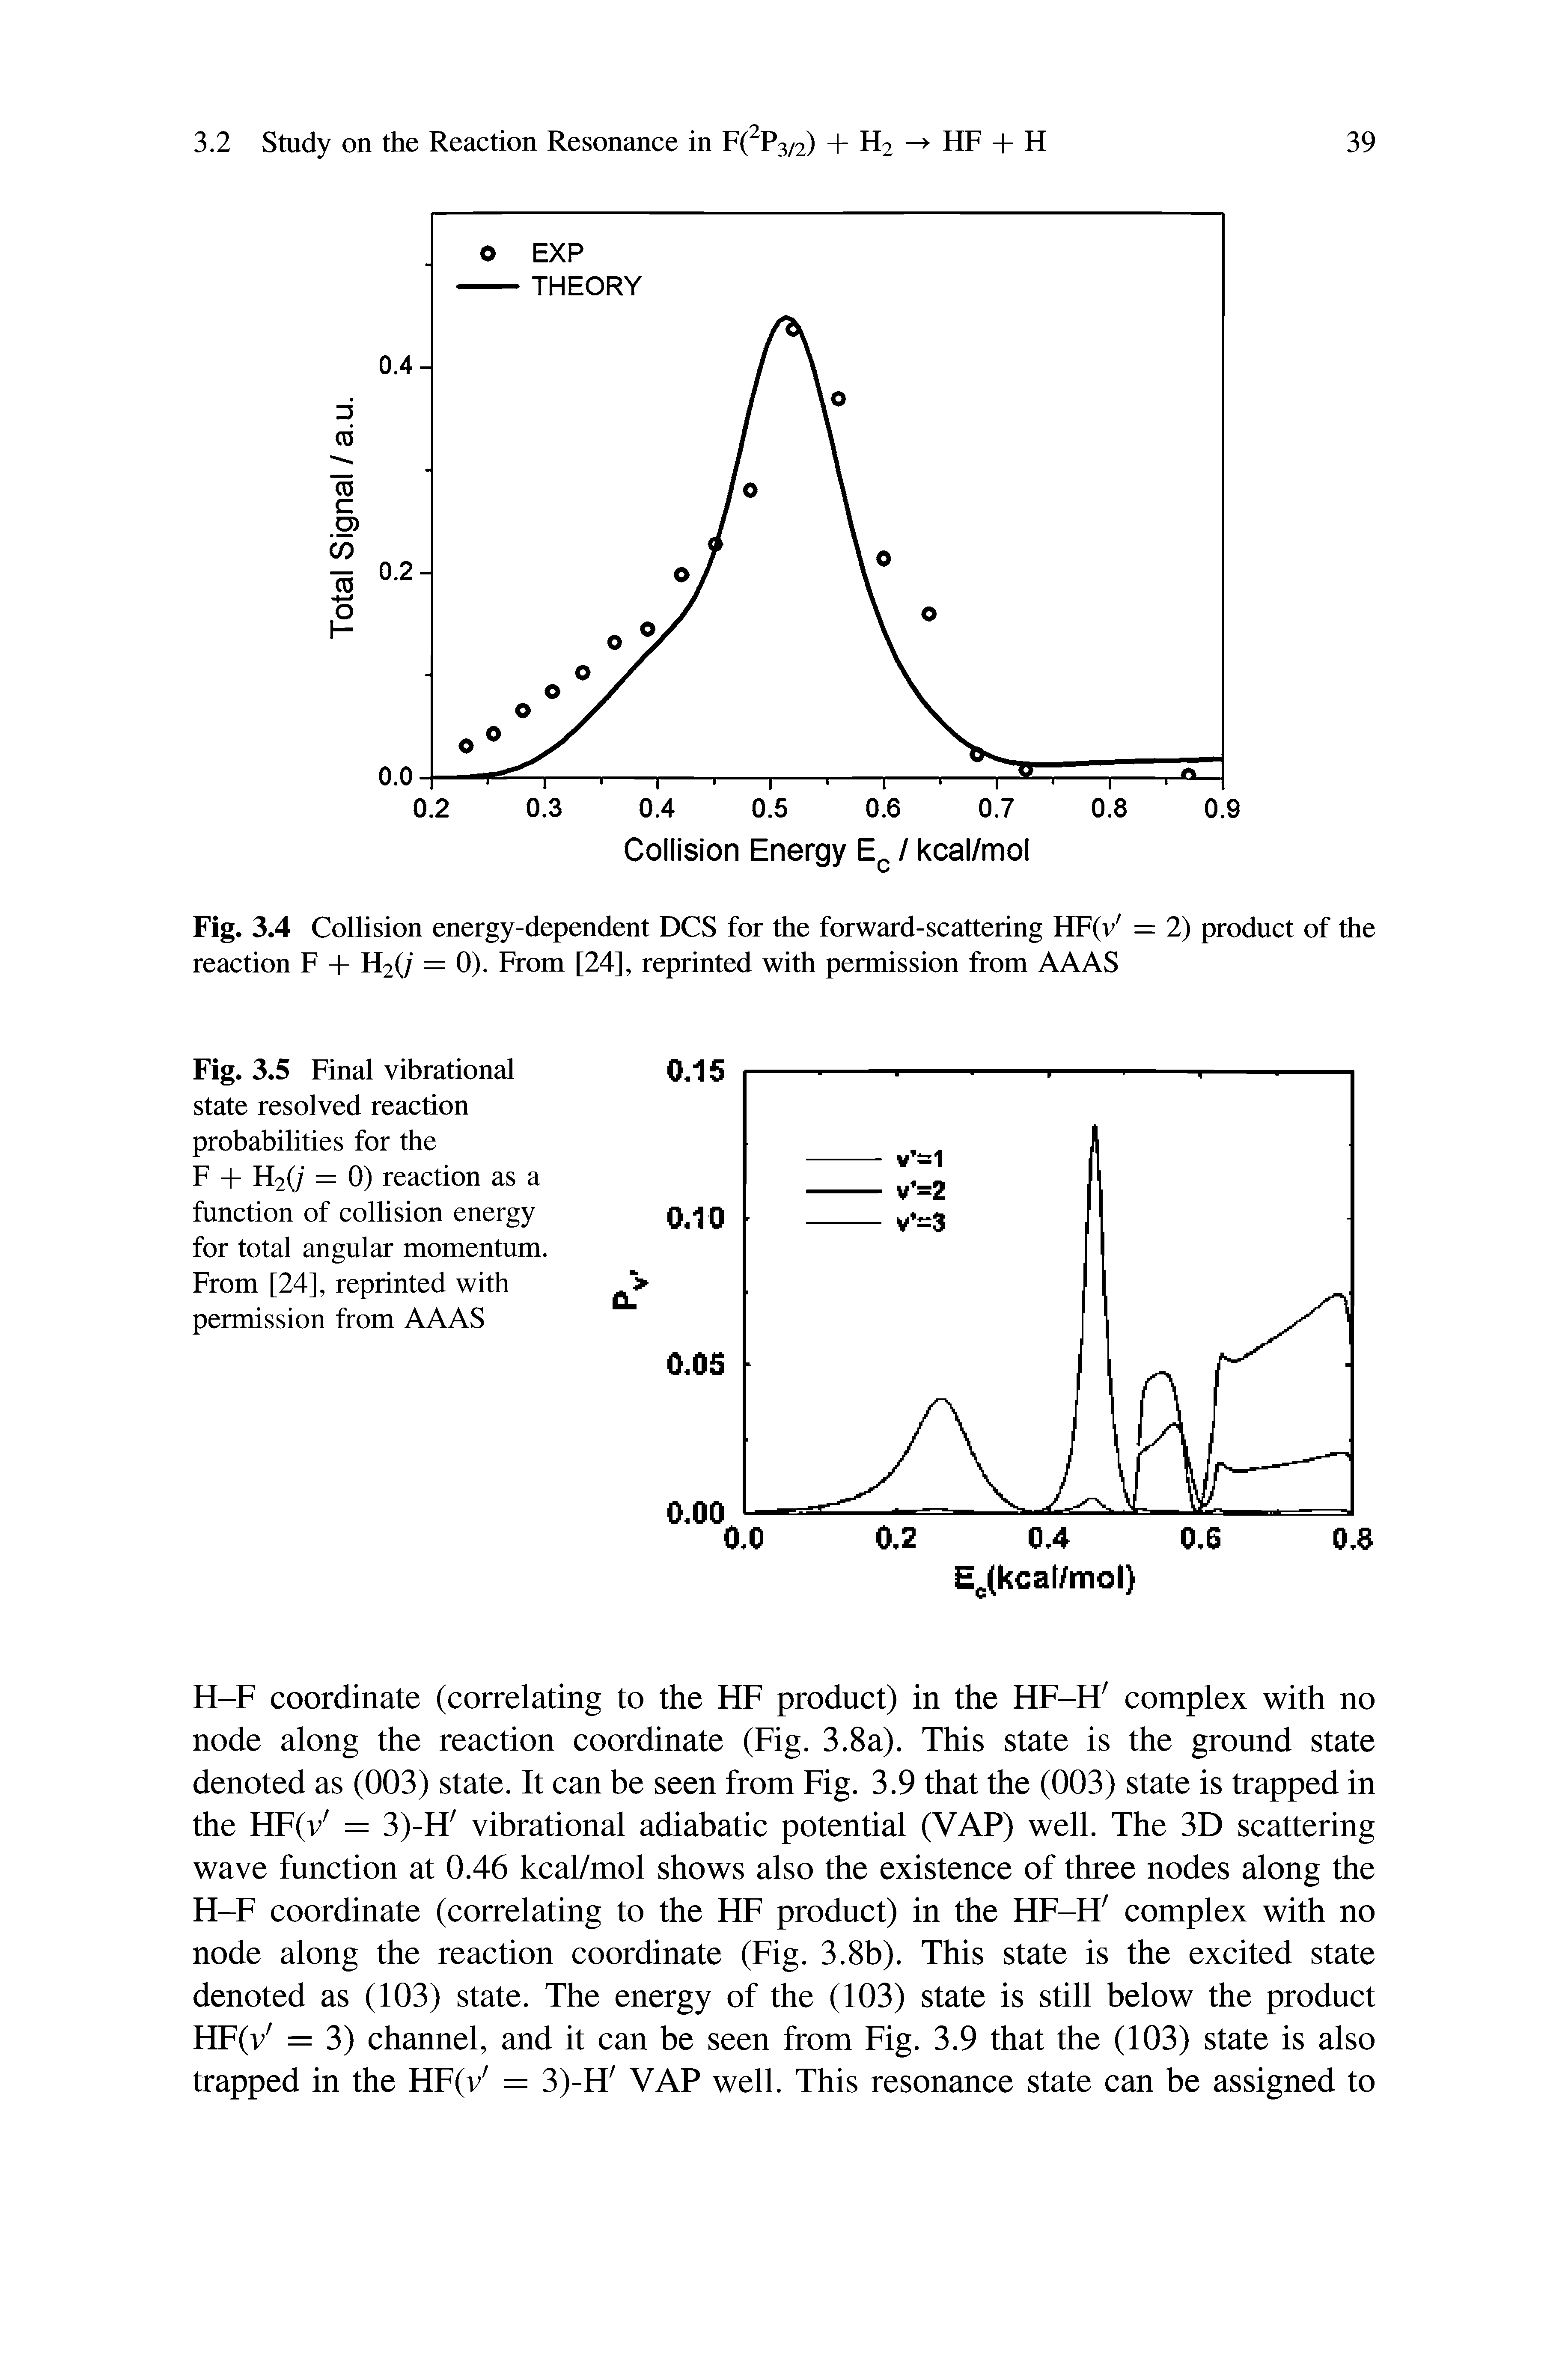 Fig. 3.4 Collision energy-dependent DCS for the forward-scattering HF(v = 2) product of the reaction F -h H2(/ = 0). From [24], reprinted with permission from AAAS...